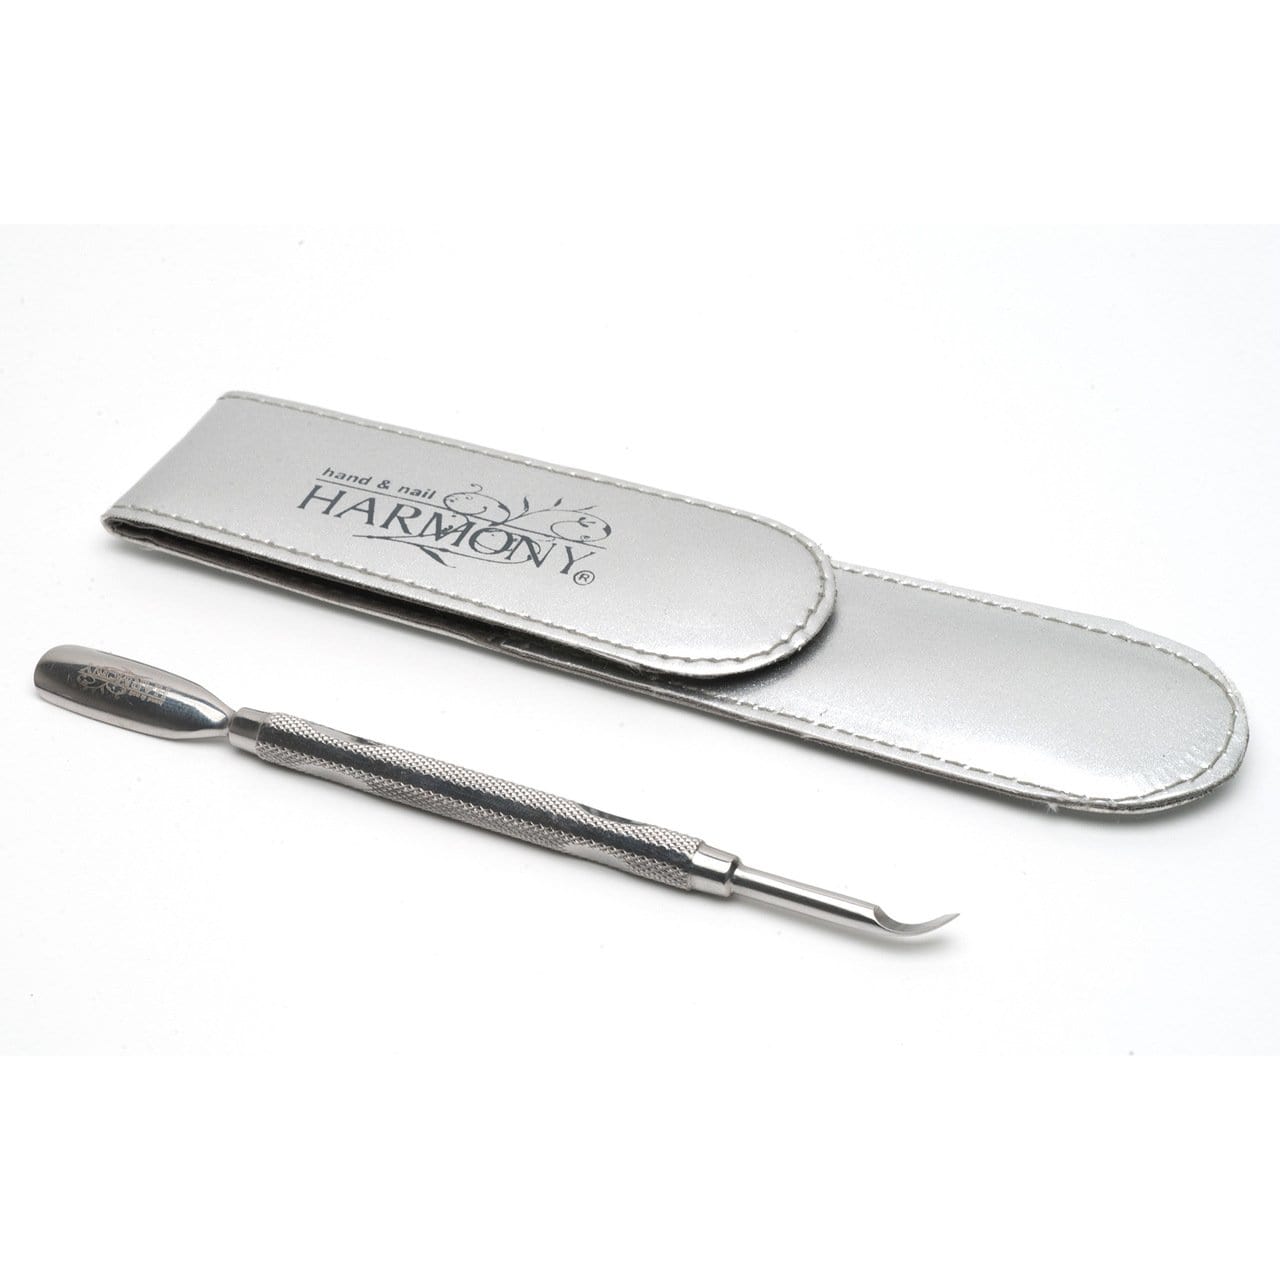 CUTICLE PUSHER & REMOVER - 2 TOOLS IN 1 - Sagema